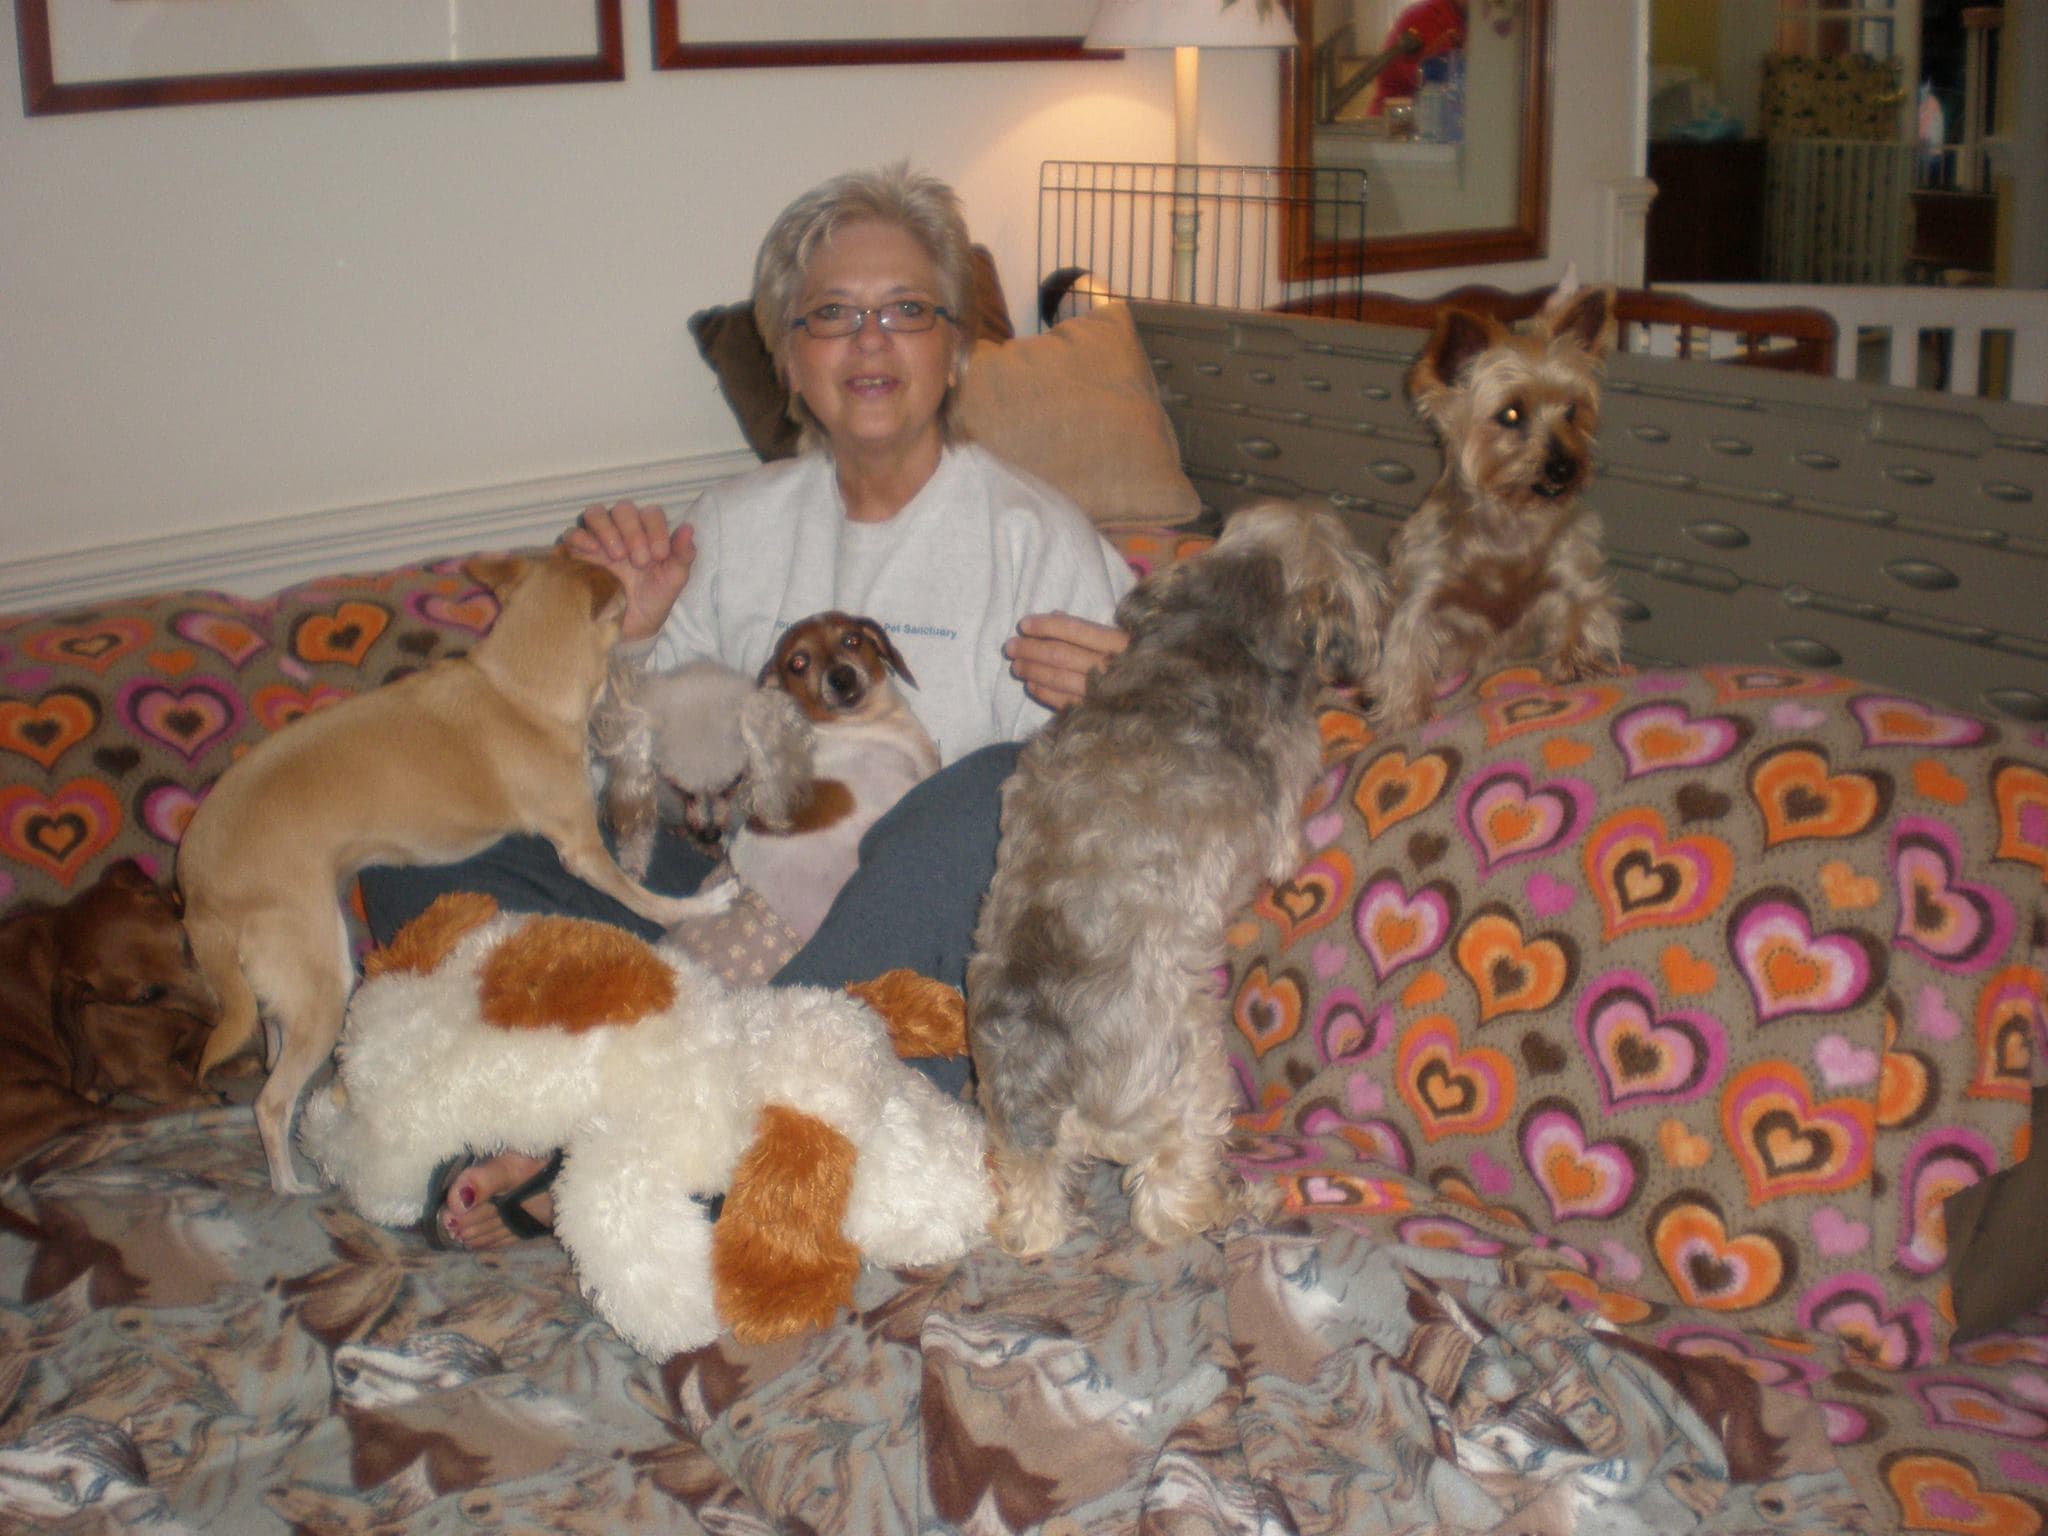 Animal Lover Turns Home Into Sanctuary for Senior Pooches